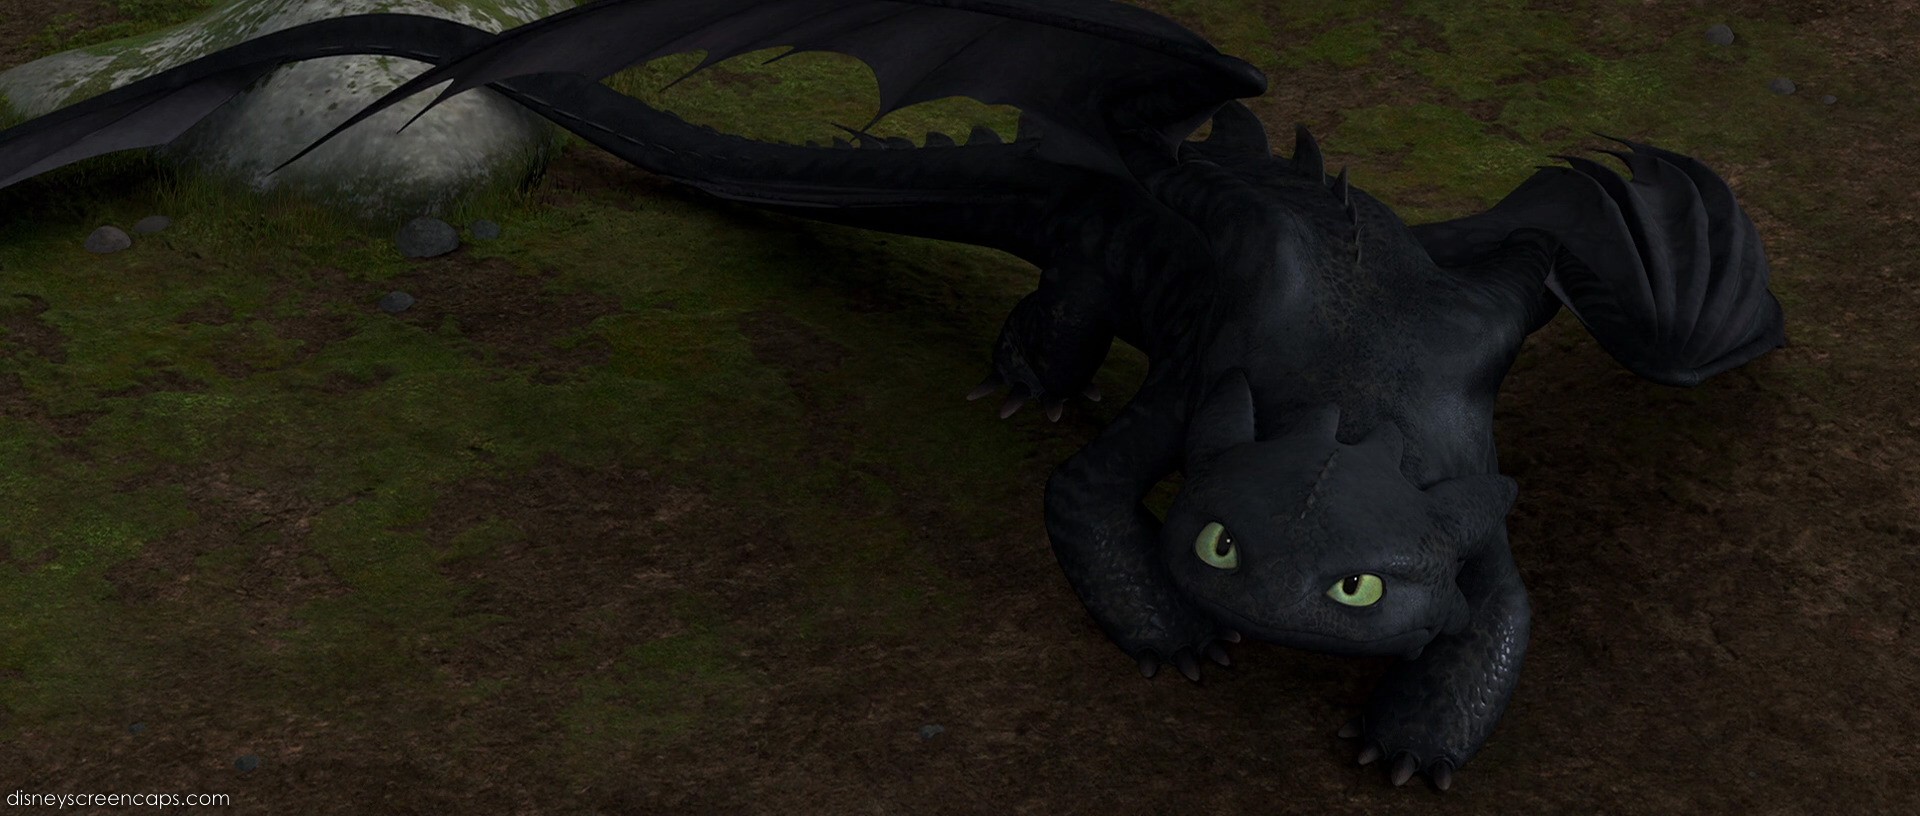 Toothless Dragon Wallpaper HD Image Pictures Becuo